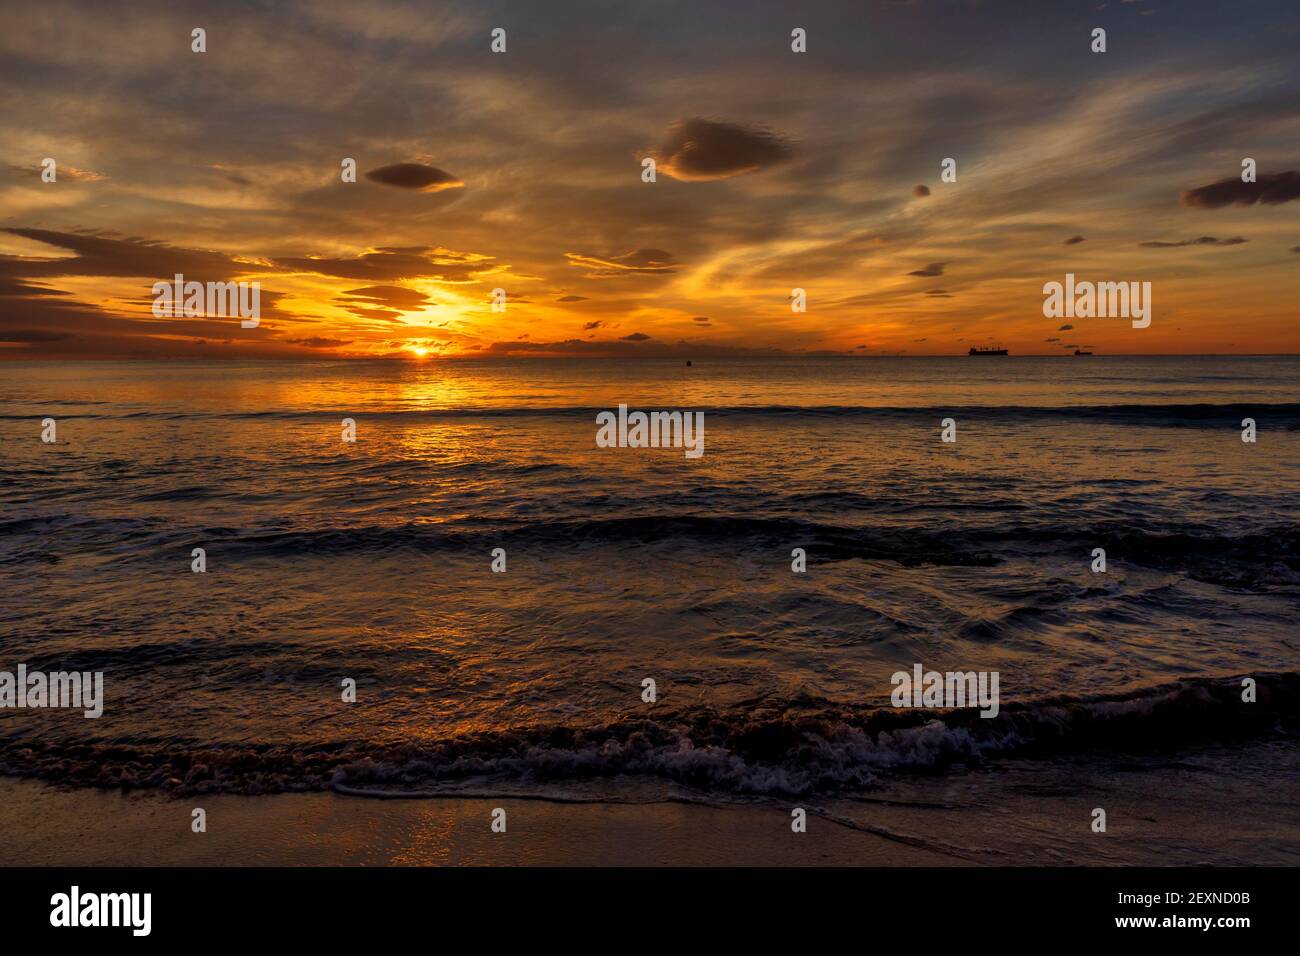 A nice and calm sunrise from the shore of the beach Stock Photo